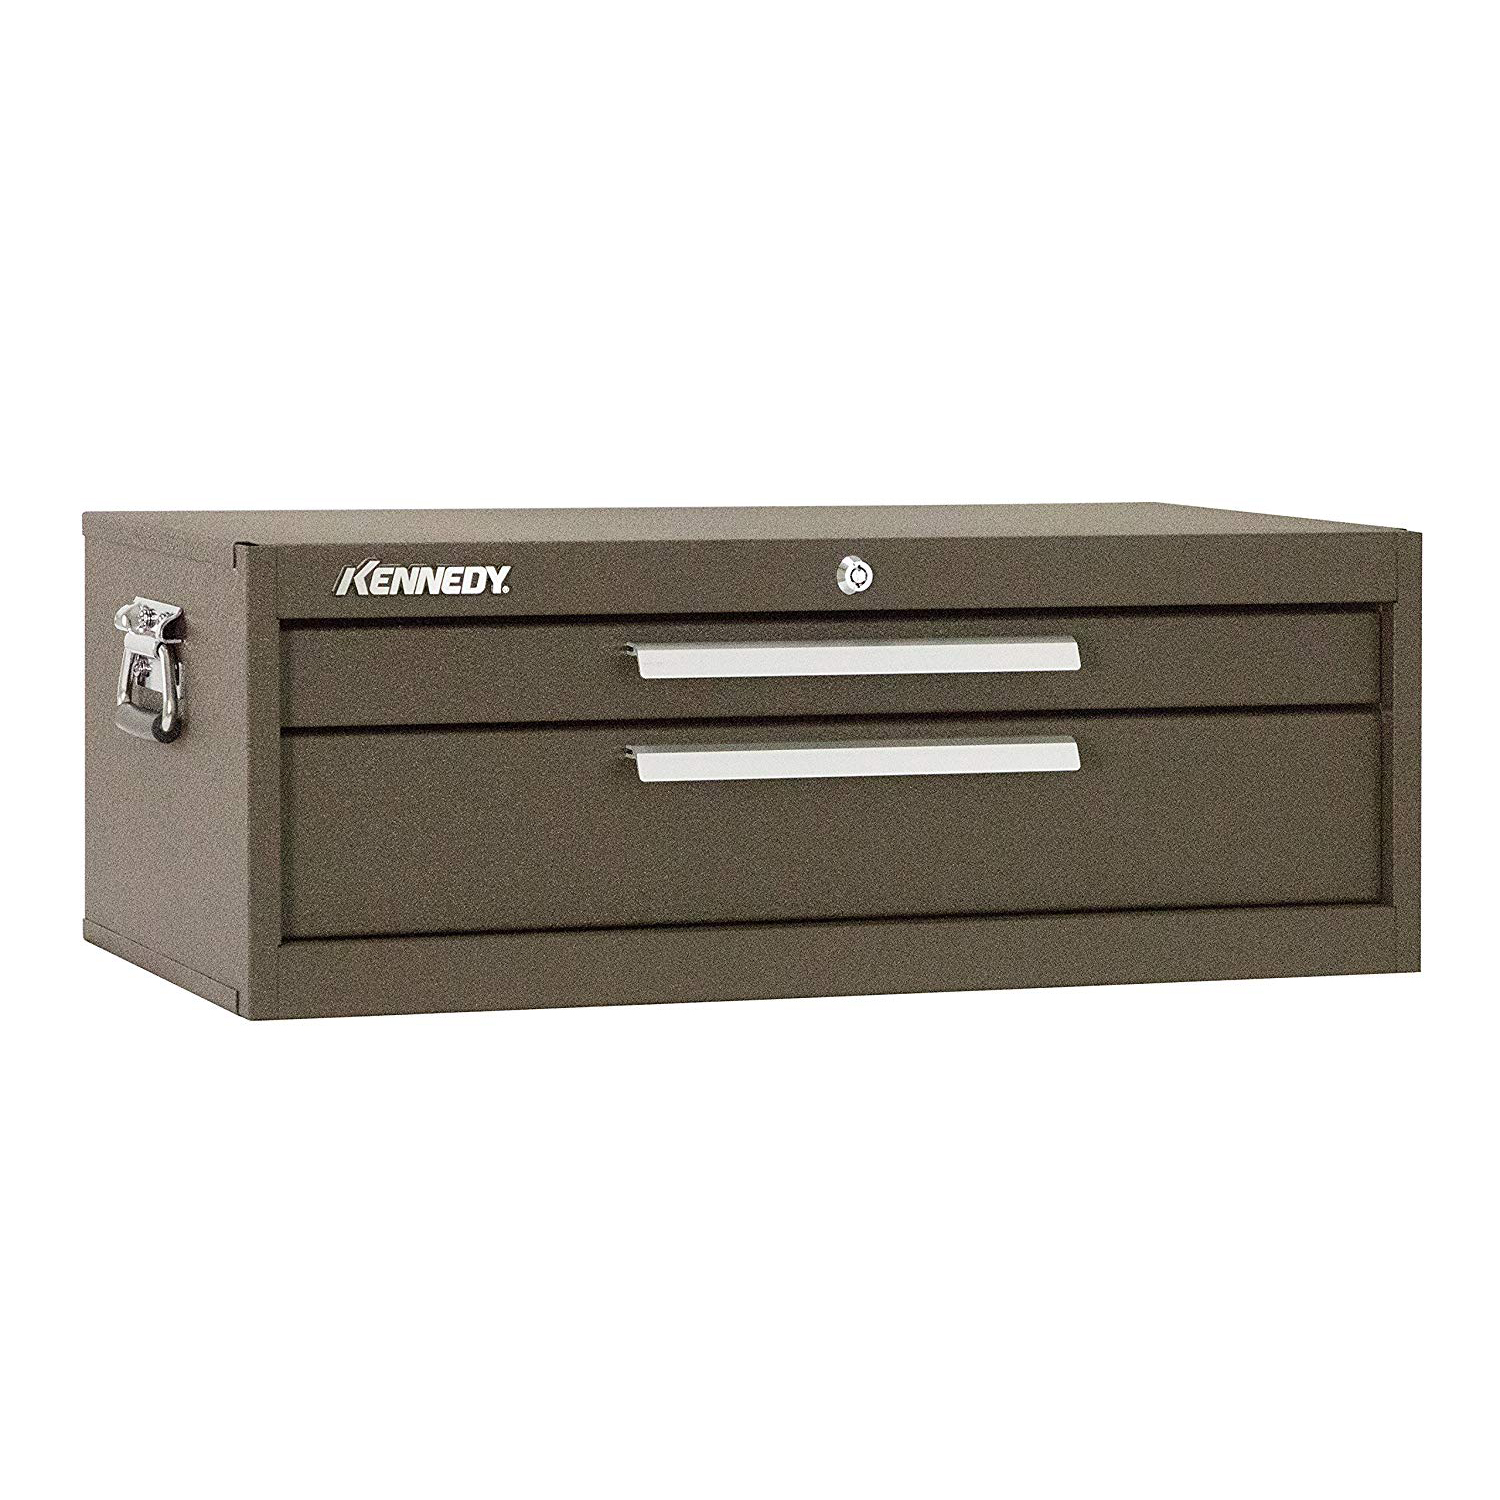 MACHINIST CHEST 26in 5150B BASE 2-DRAWER BROWN WRINKLE